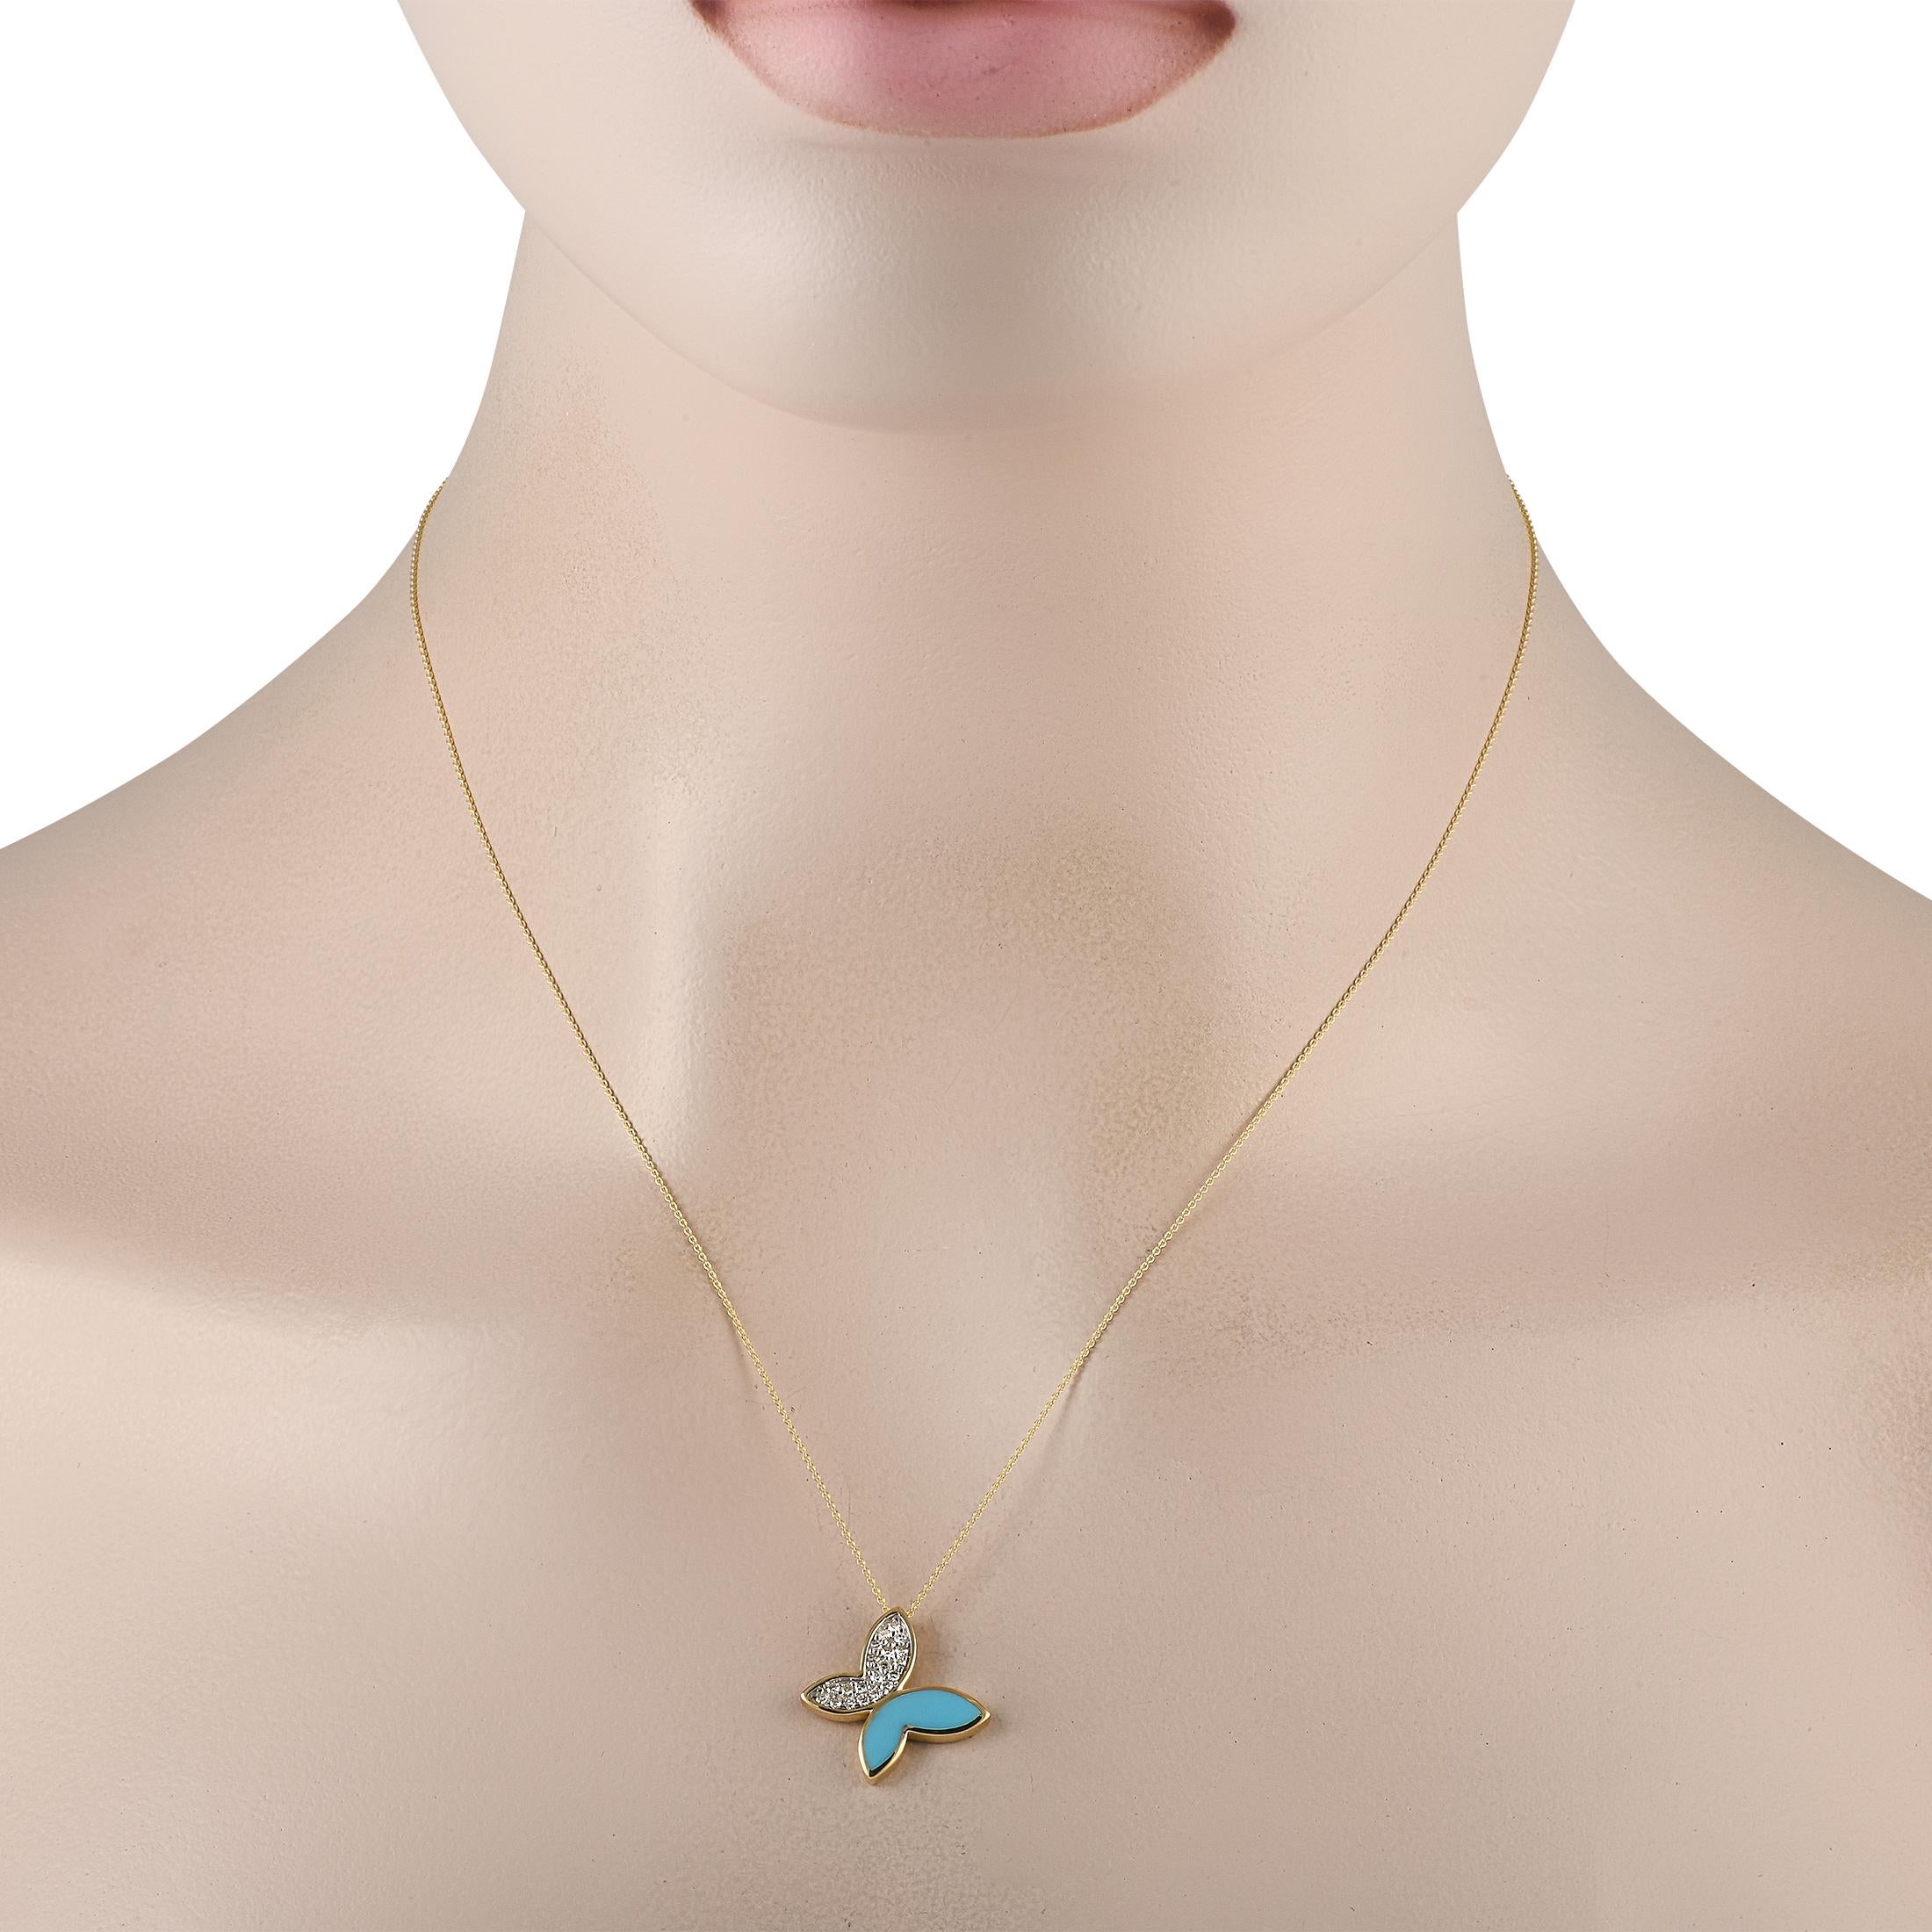 A stunning butterfly pendant measuring 0.75 round comes to life thanks to a blue inlaid accent and inset diamonds totaling 0.15 carats. This exquisite accessory is crafted from opulent 14K yellow gold and features an 18 chain.This jewelry piece is